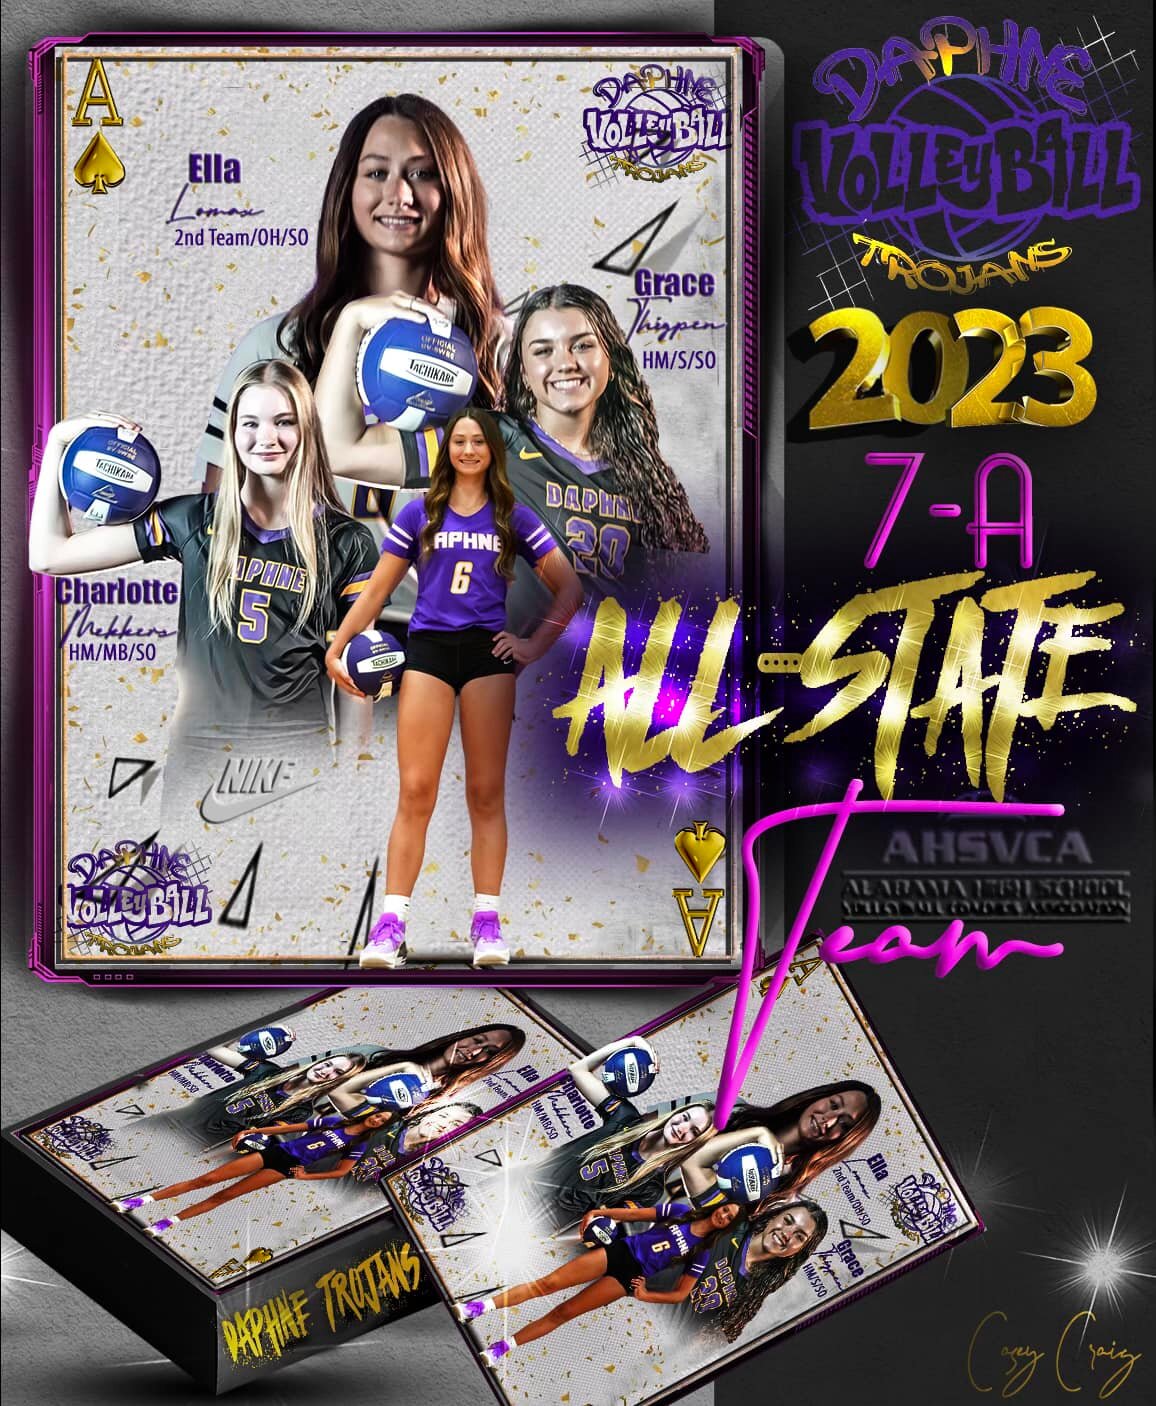 A trio of sophomore standouts from Daphne were honored with all-state distinction by the Alabama High School Volleyball Coaches Association. Charlotte Mekkers and Grace Thigpen were both honorable mentions where Ella Lomax earned a second-team spot.